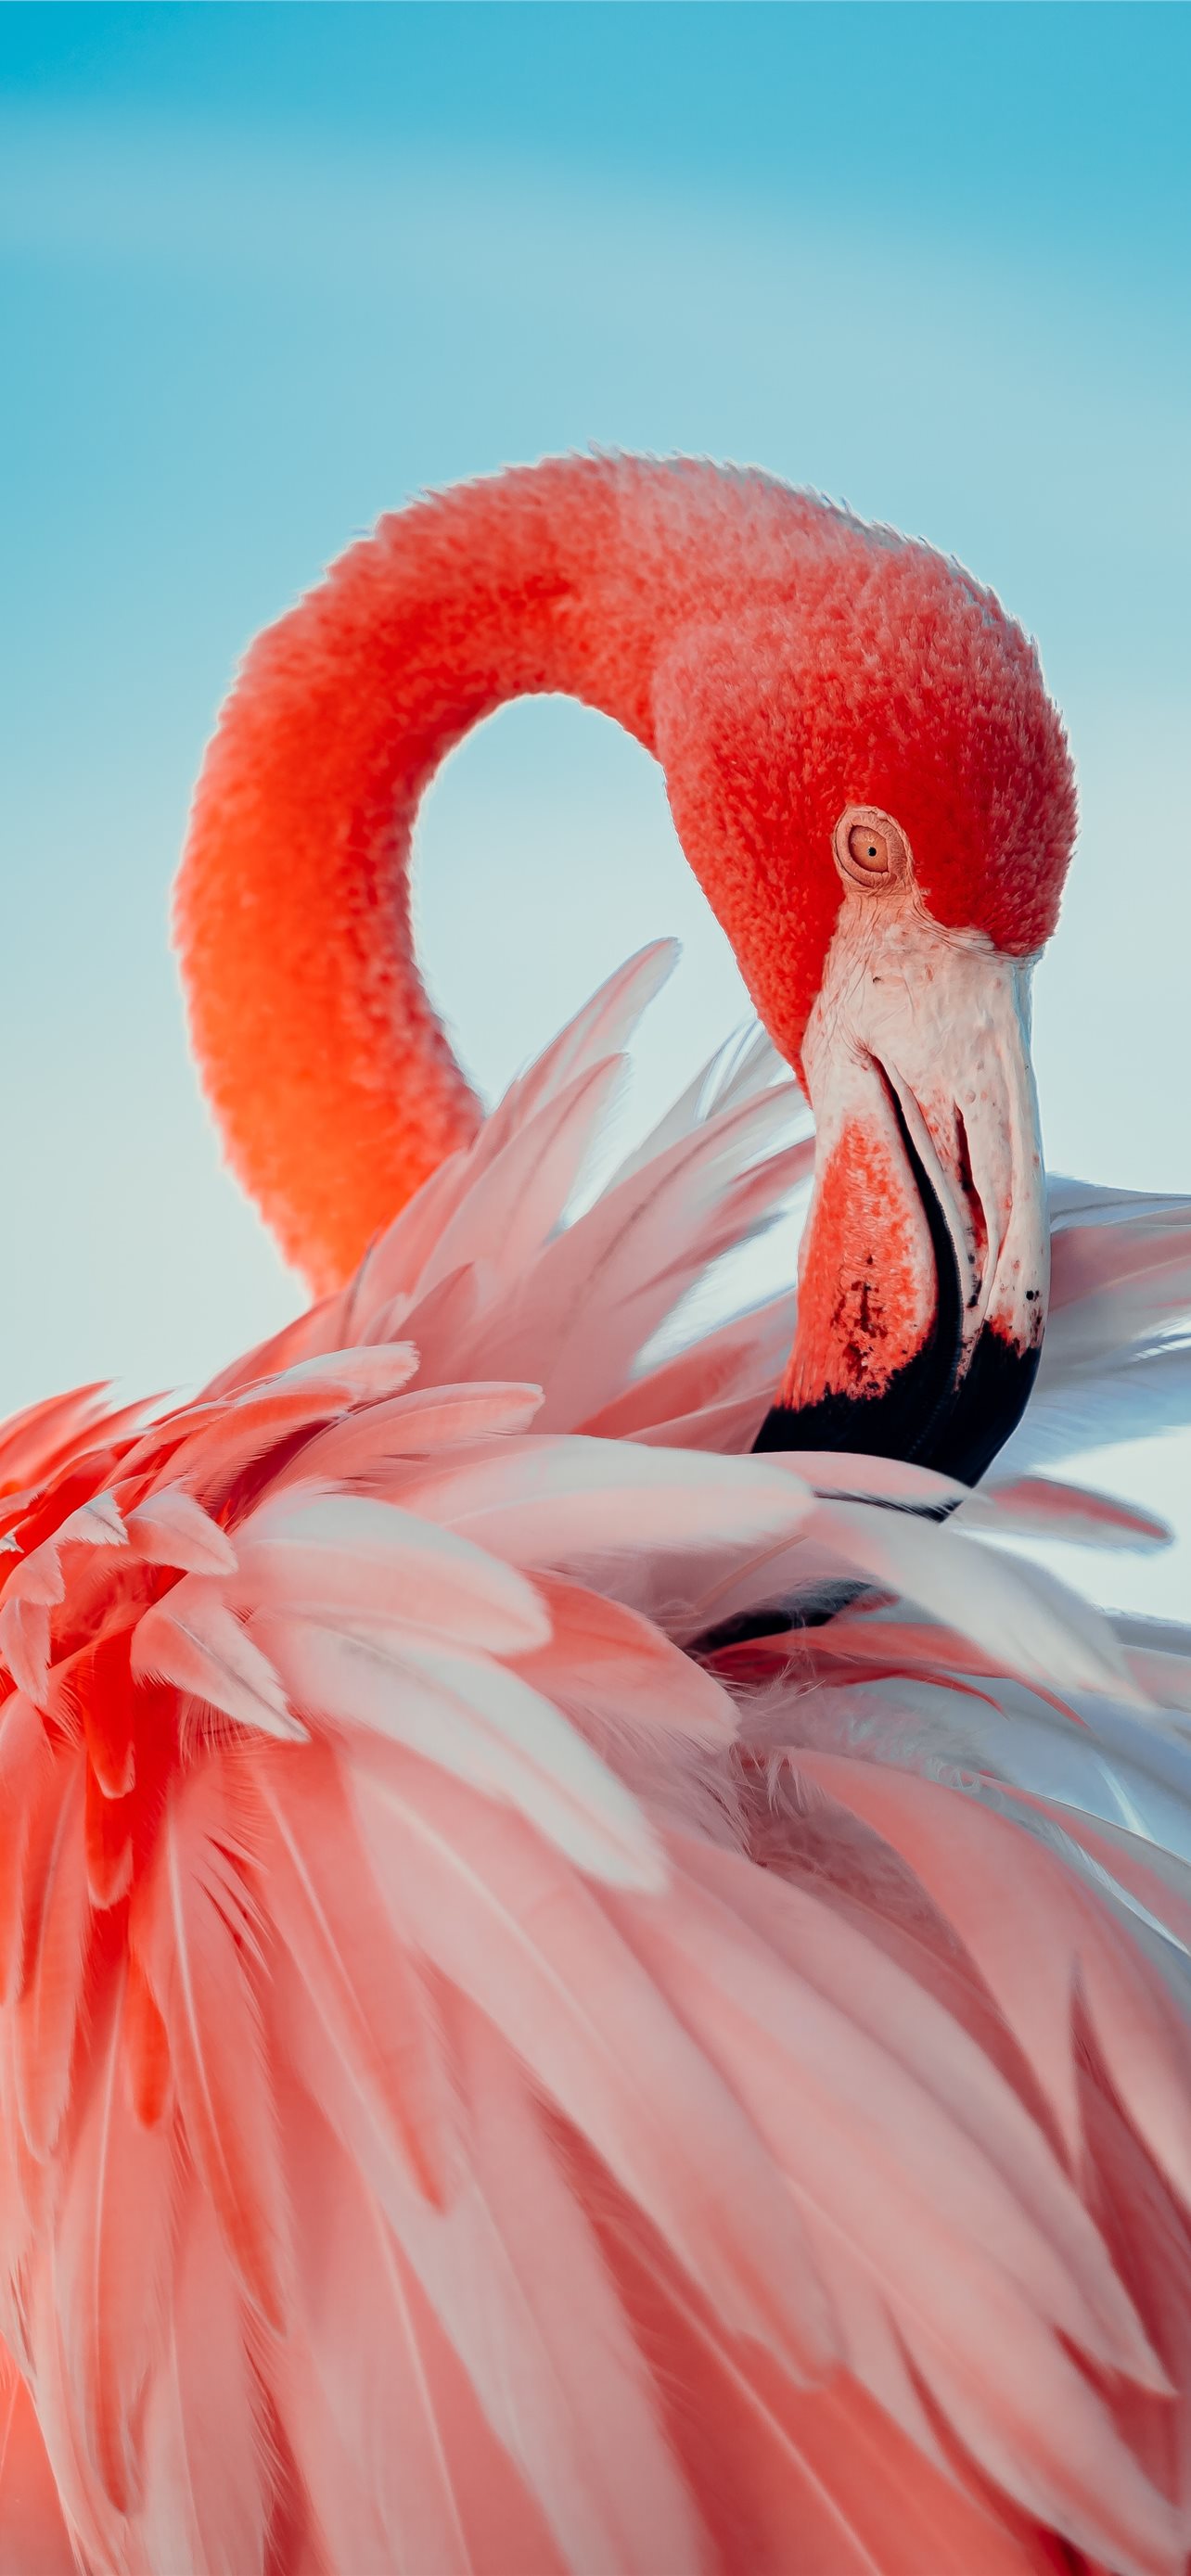 Pink Flamingo In Close Up Photography Iphone Wallpapers Free Download